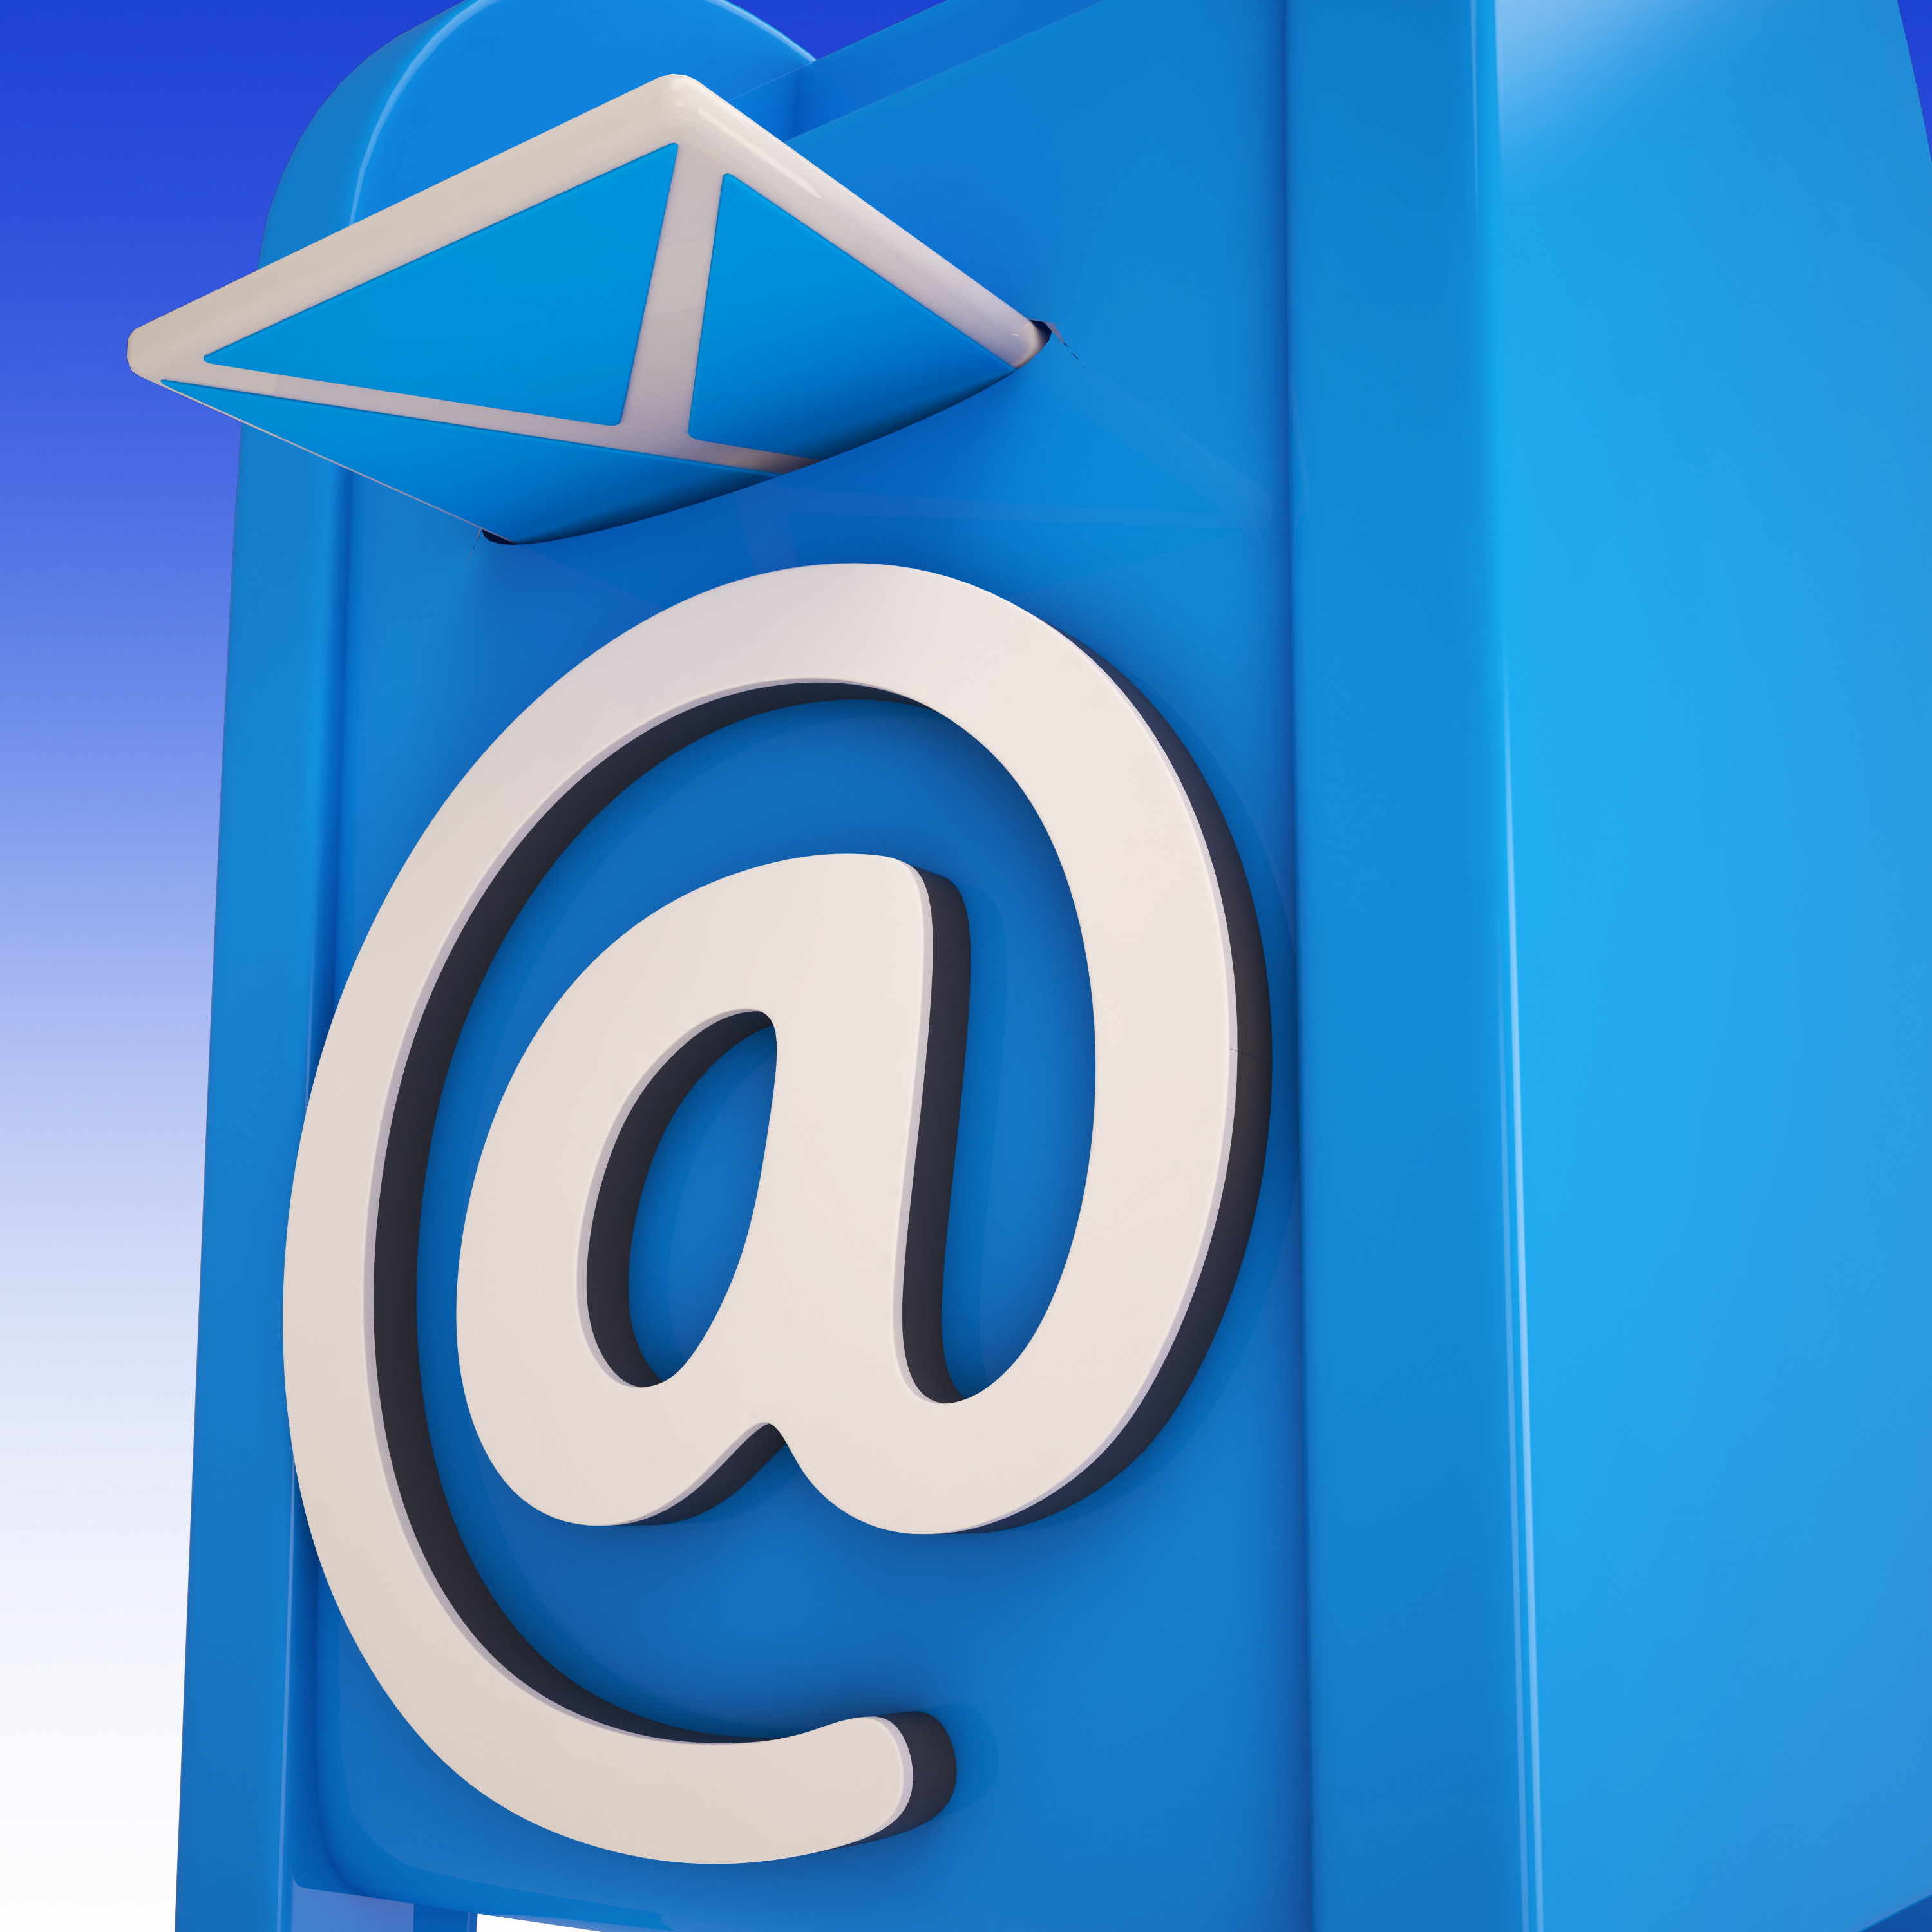 Email On Email box Showing Delivered Mails